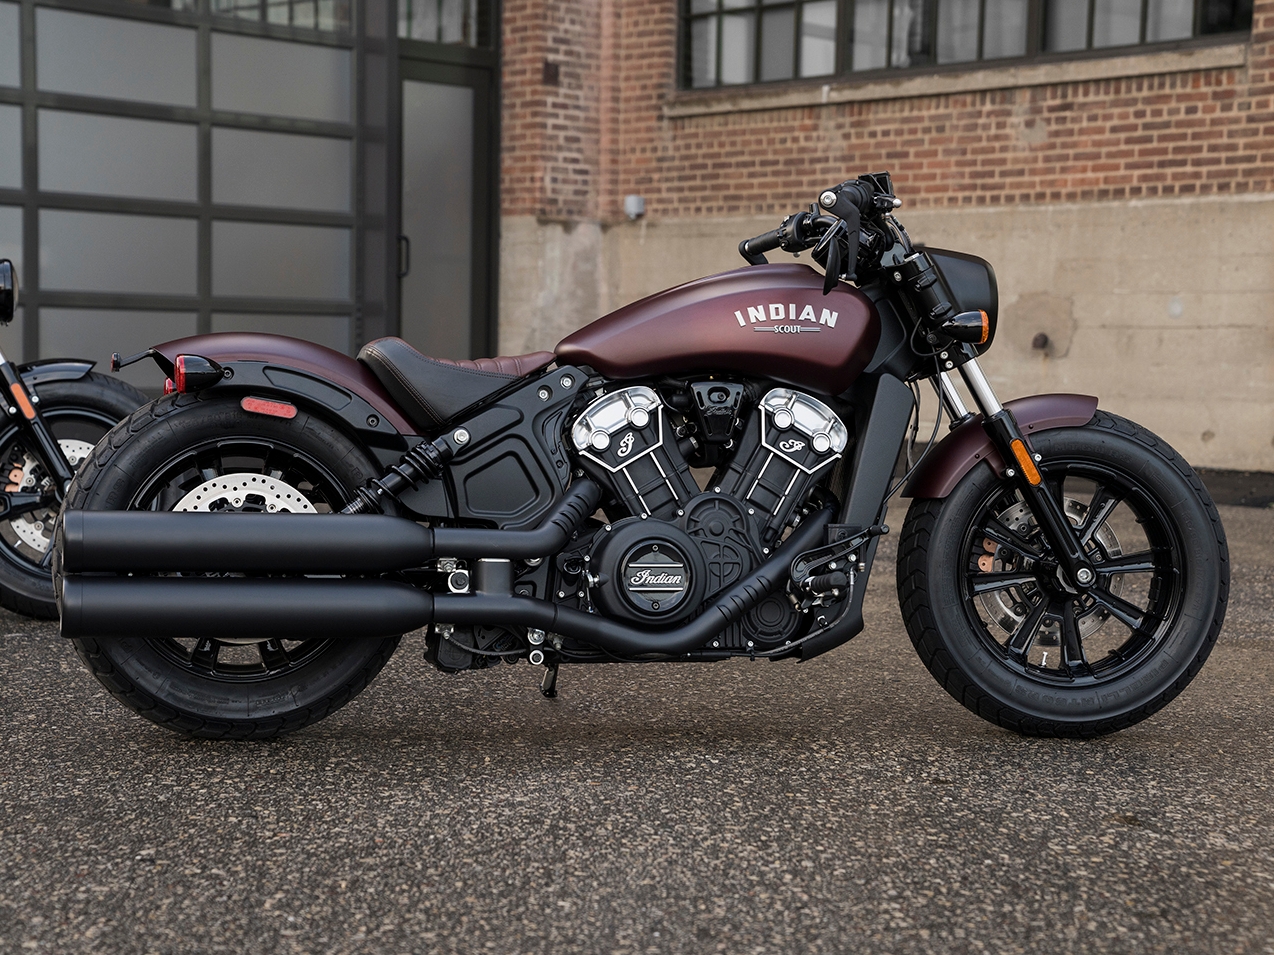 2021 Indian Scout Bobber Buyer's Guide: Specs, Photos, Price